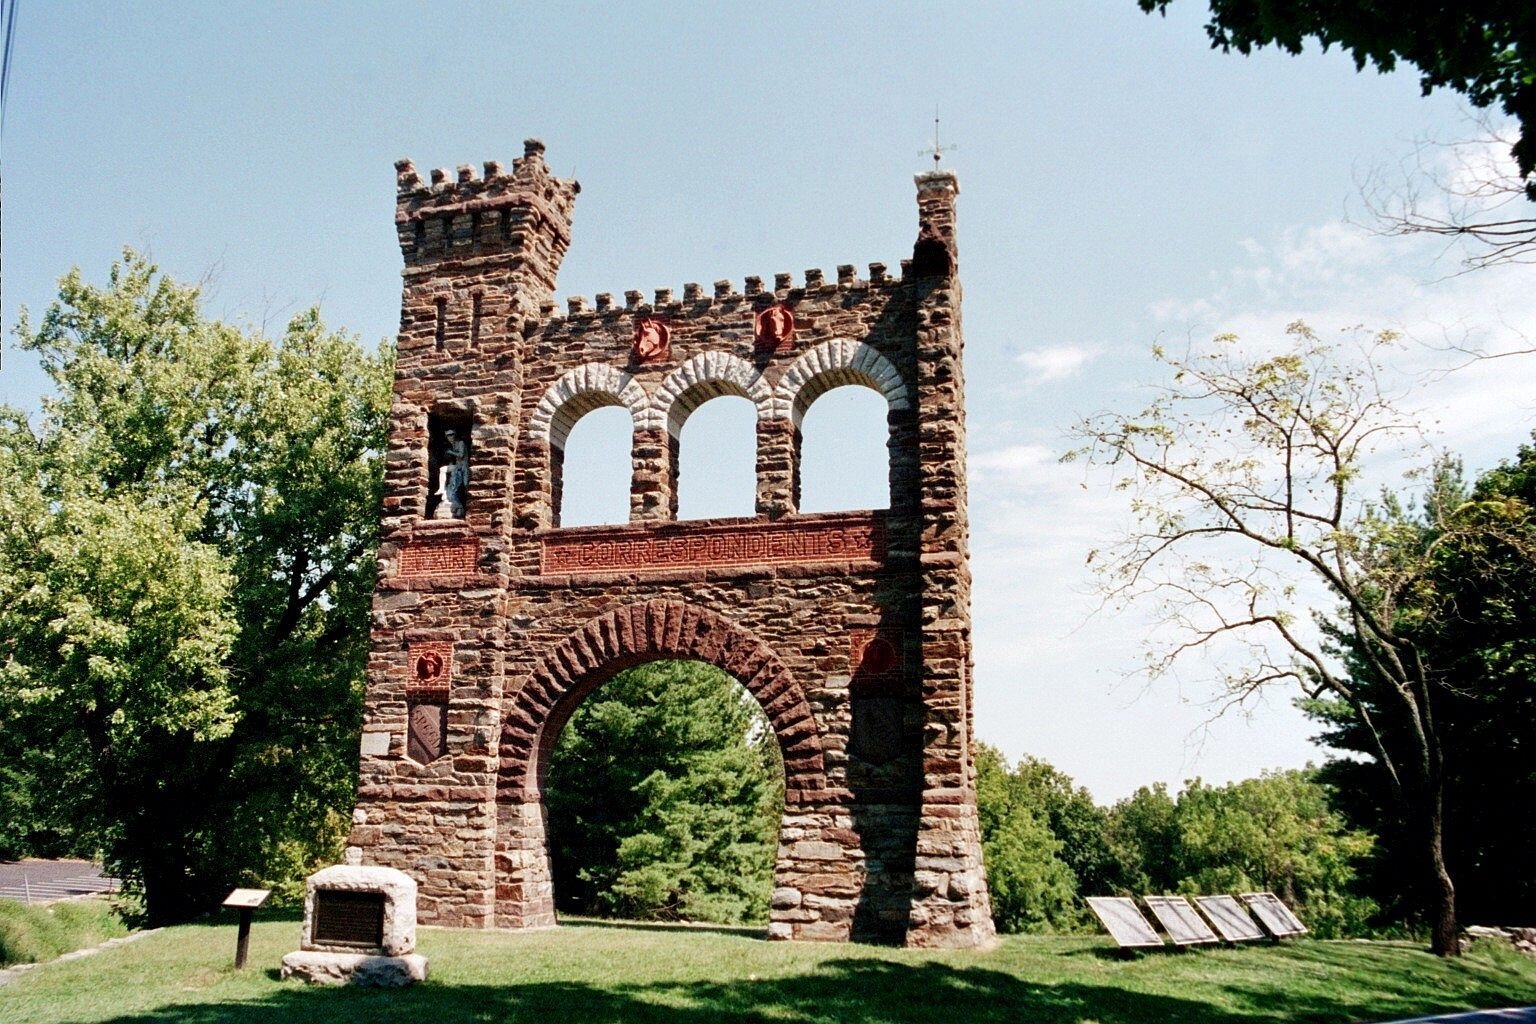 The Battle of South Mountain Marker near the War Correspondents Memorial Arch